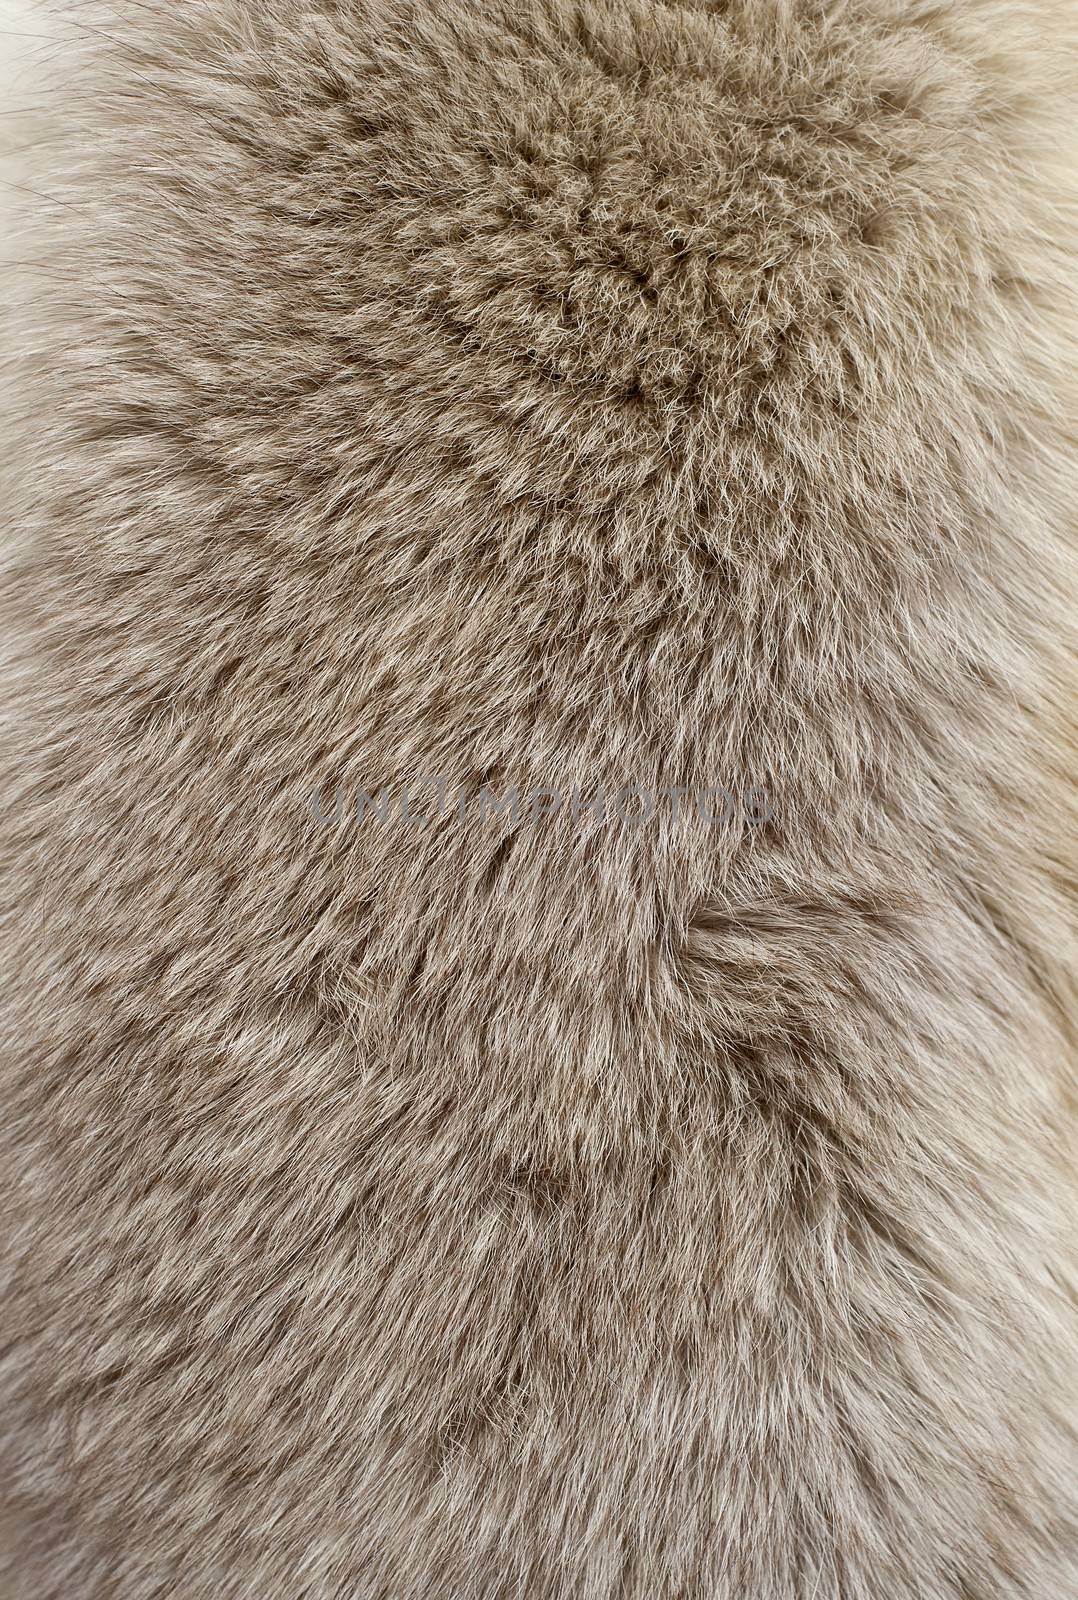 Close up of an animal colored fur texture